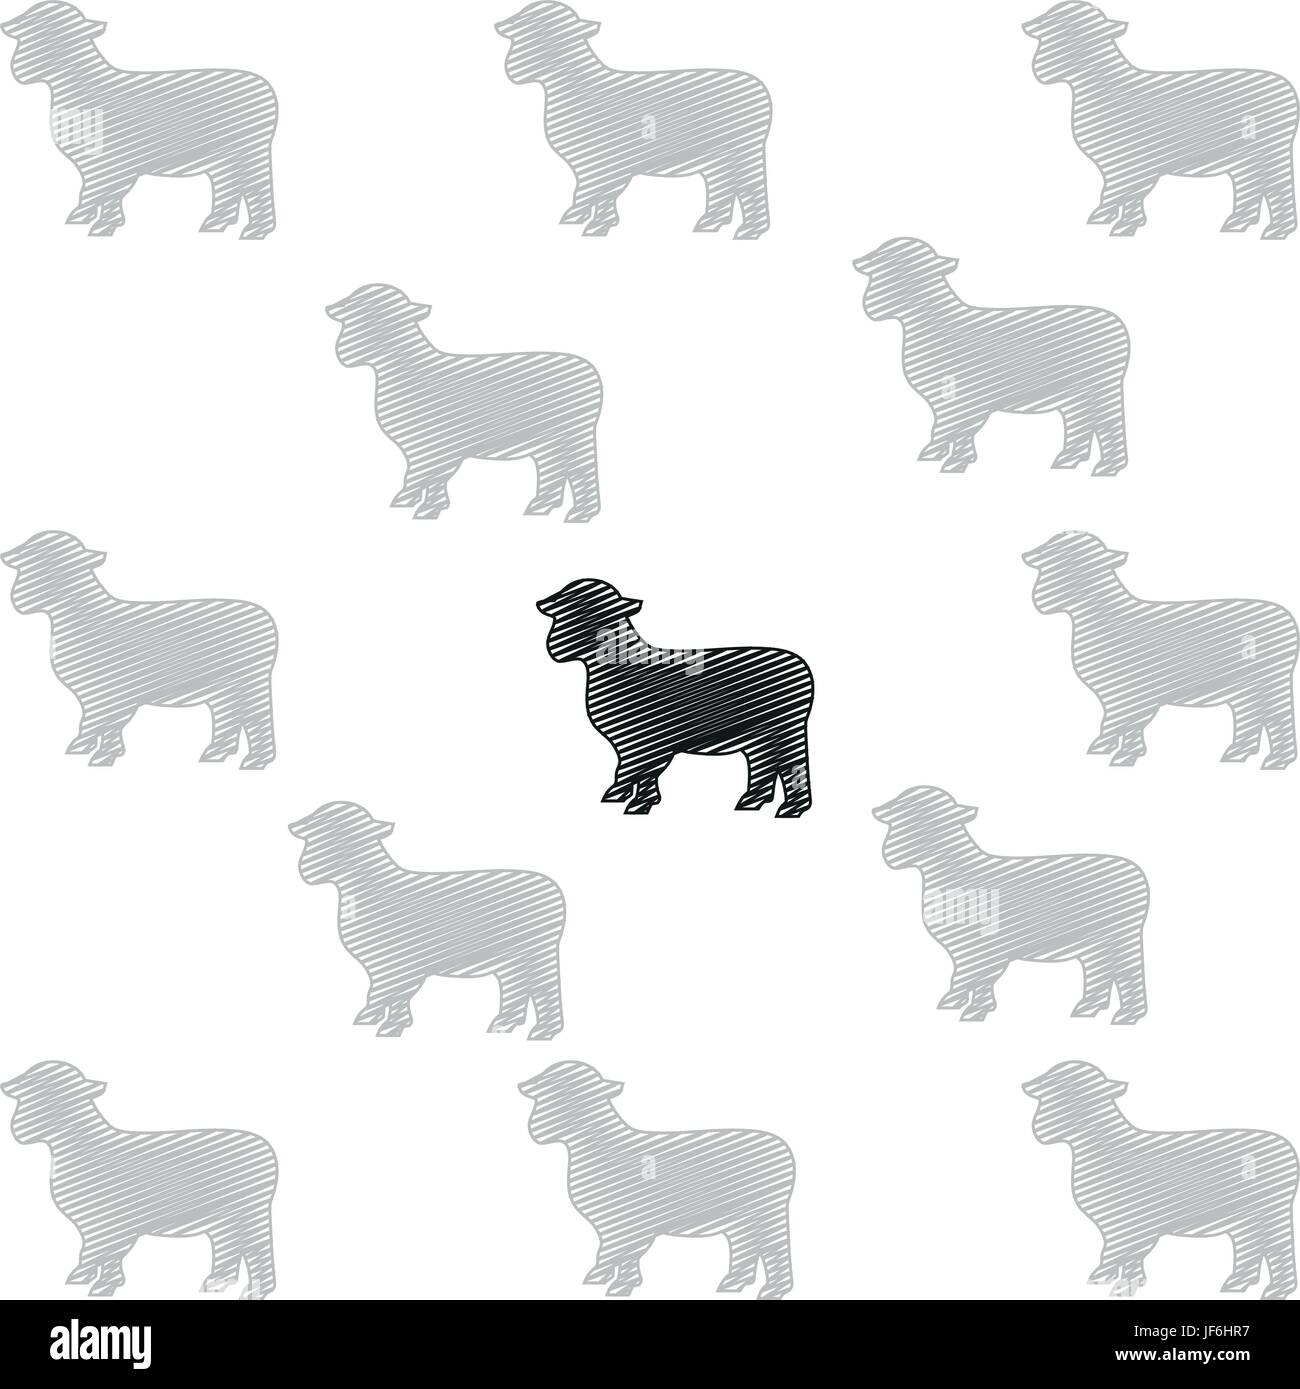 sheep, herd, individual, outsider, expectations, familiy, family, queer, Stock Vector